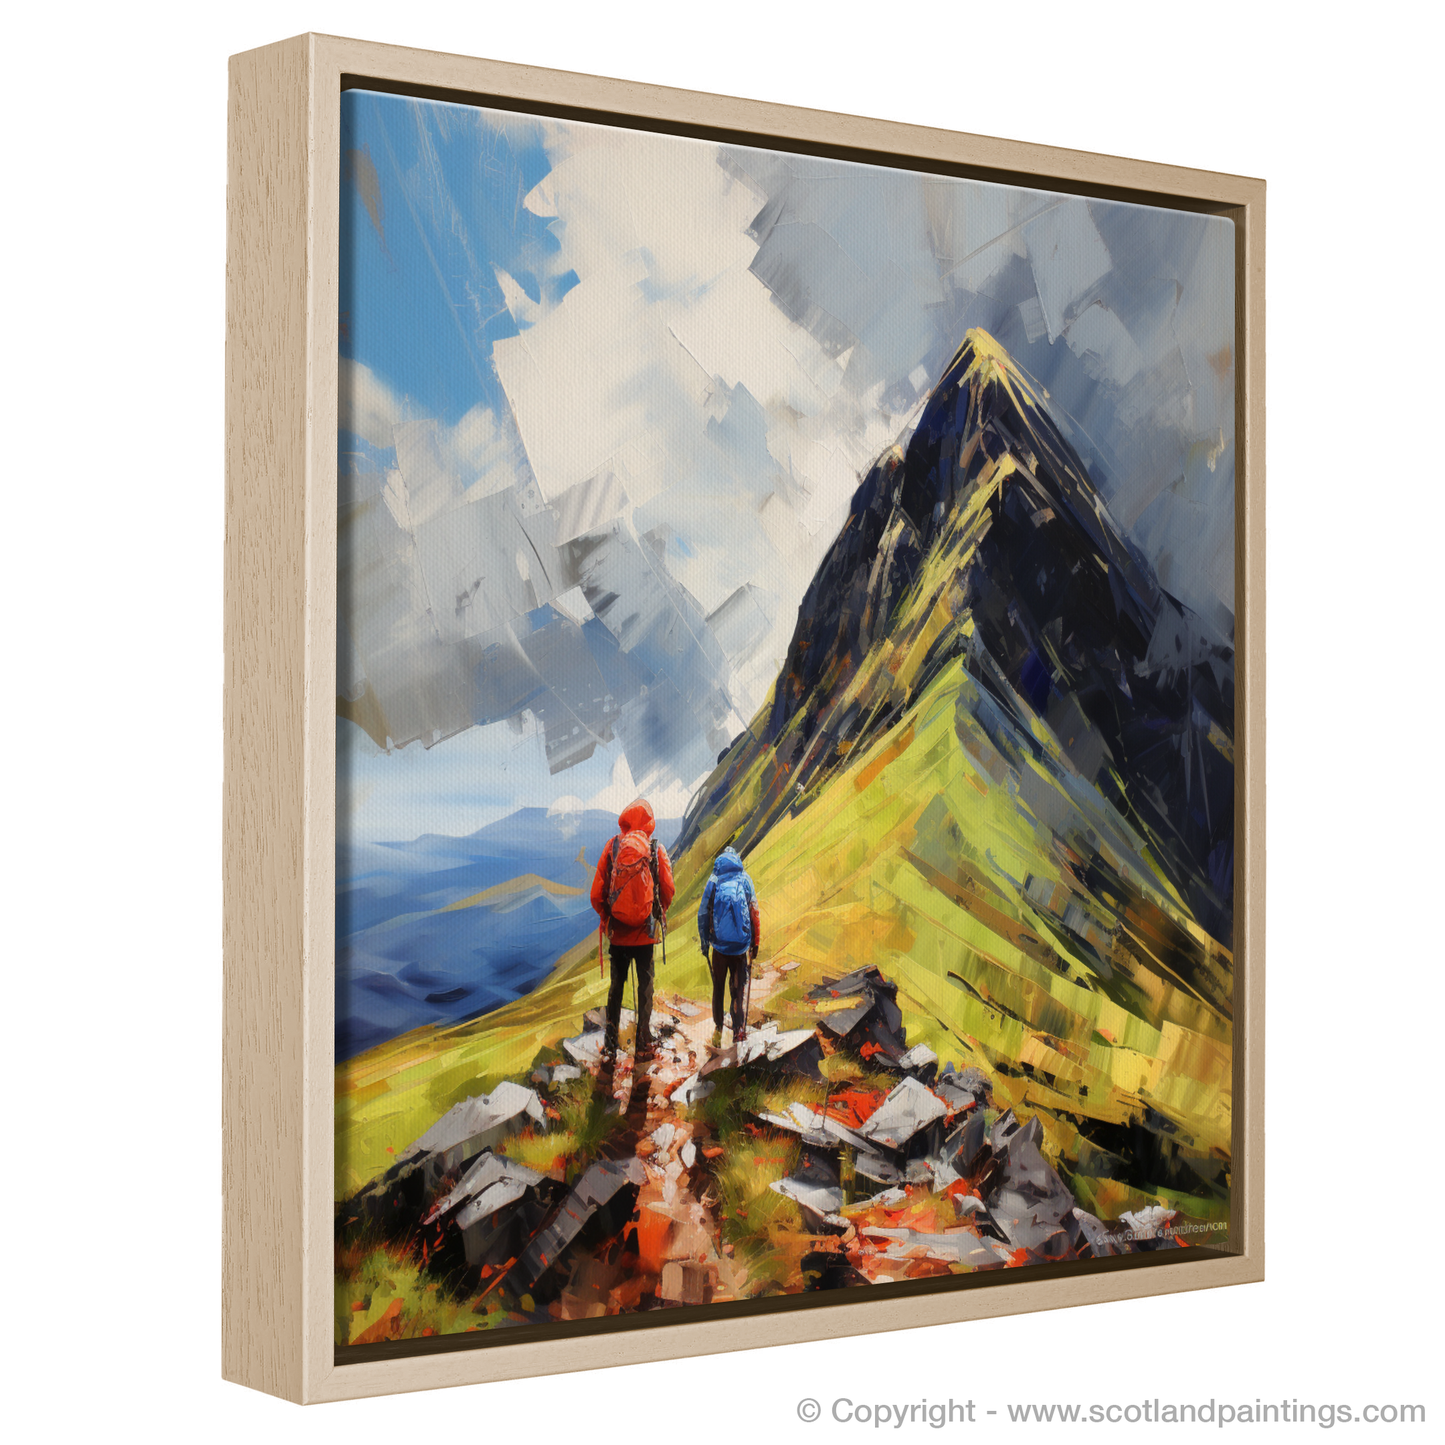 Painting and Art Print of Hikers at Buachaille summit in Glencoe entitled "Hikers Ascent to Buachaille Summit: An Expressionist Ode to Glencoe".